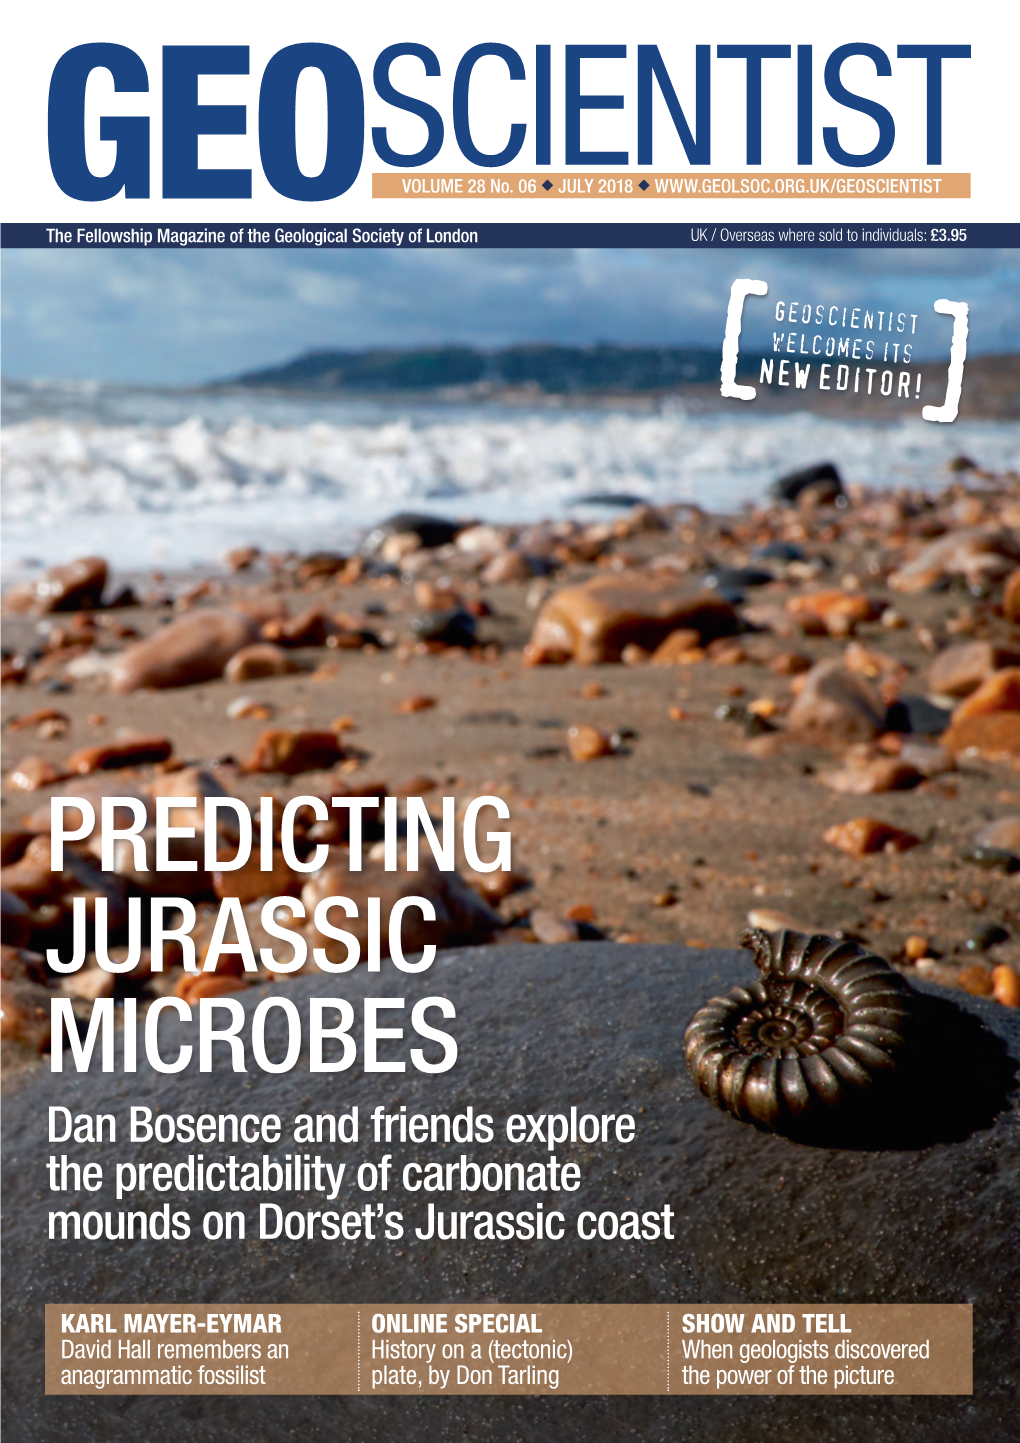 PREDICTING JURASSIC MICROBES Dan Bosence and Friends Explore the Predictability of Carbonate Mounds on Dorset’S Jurassic Coast